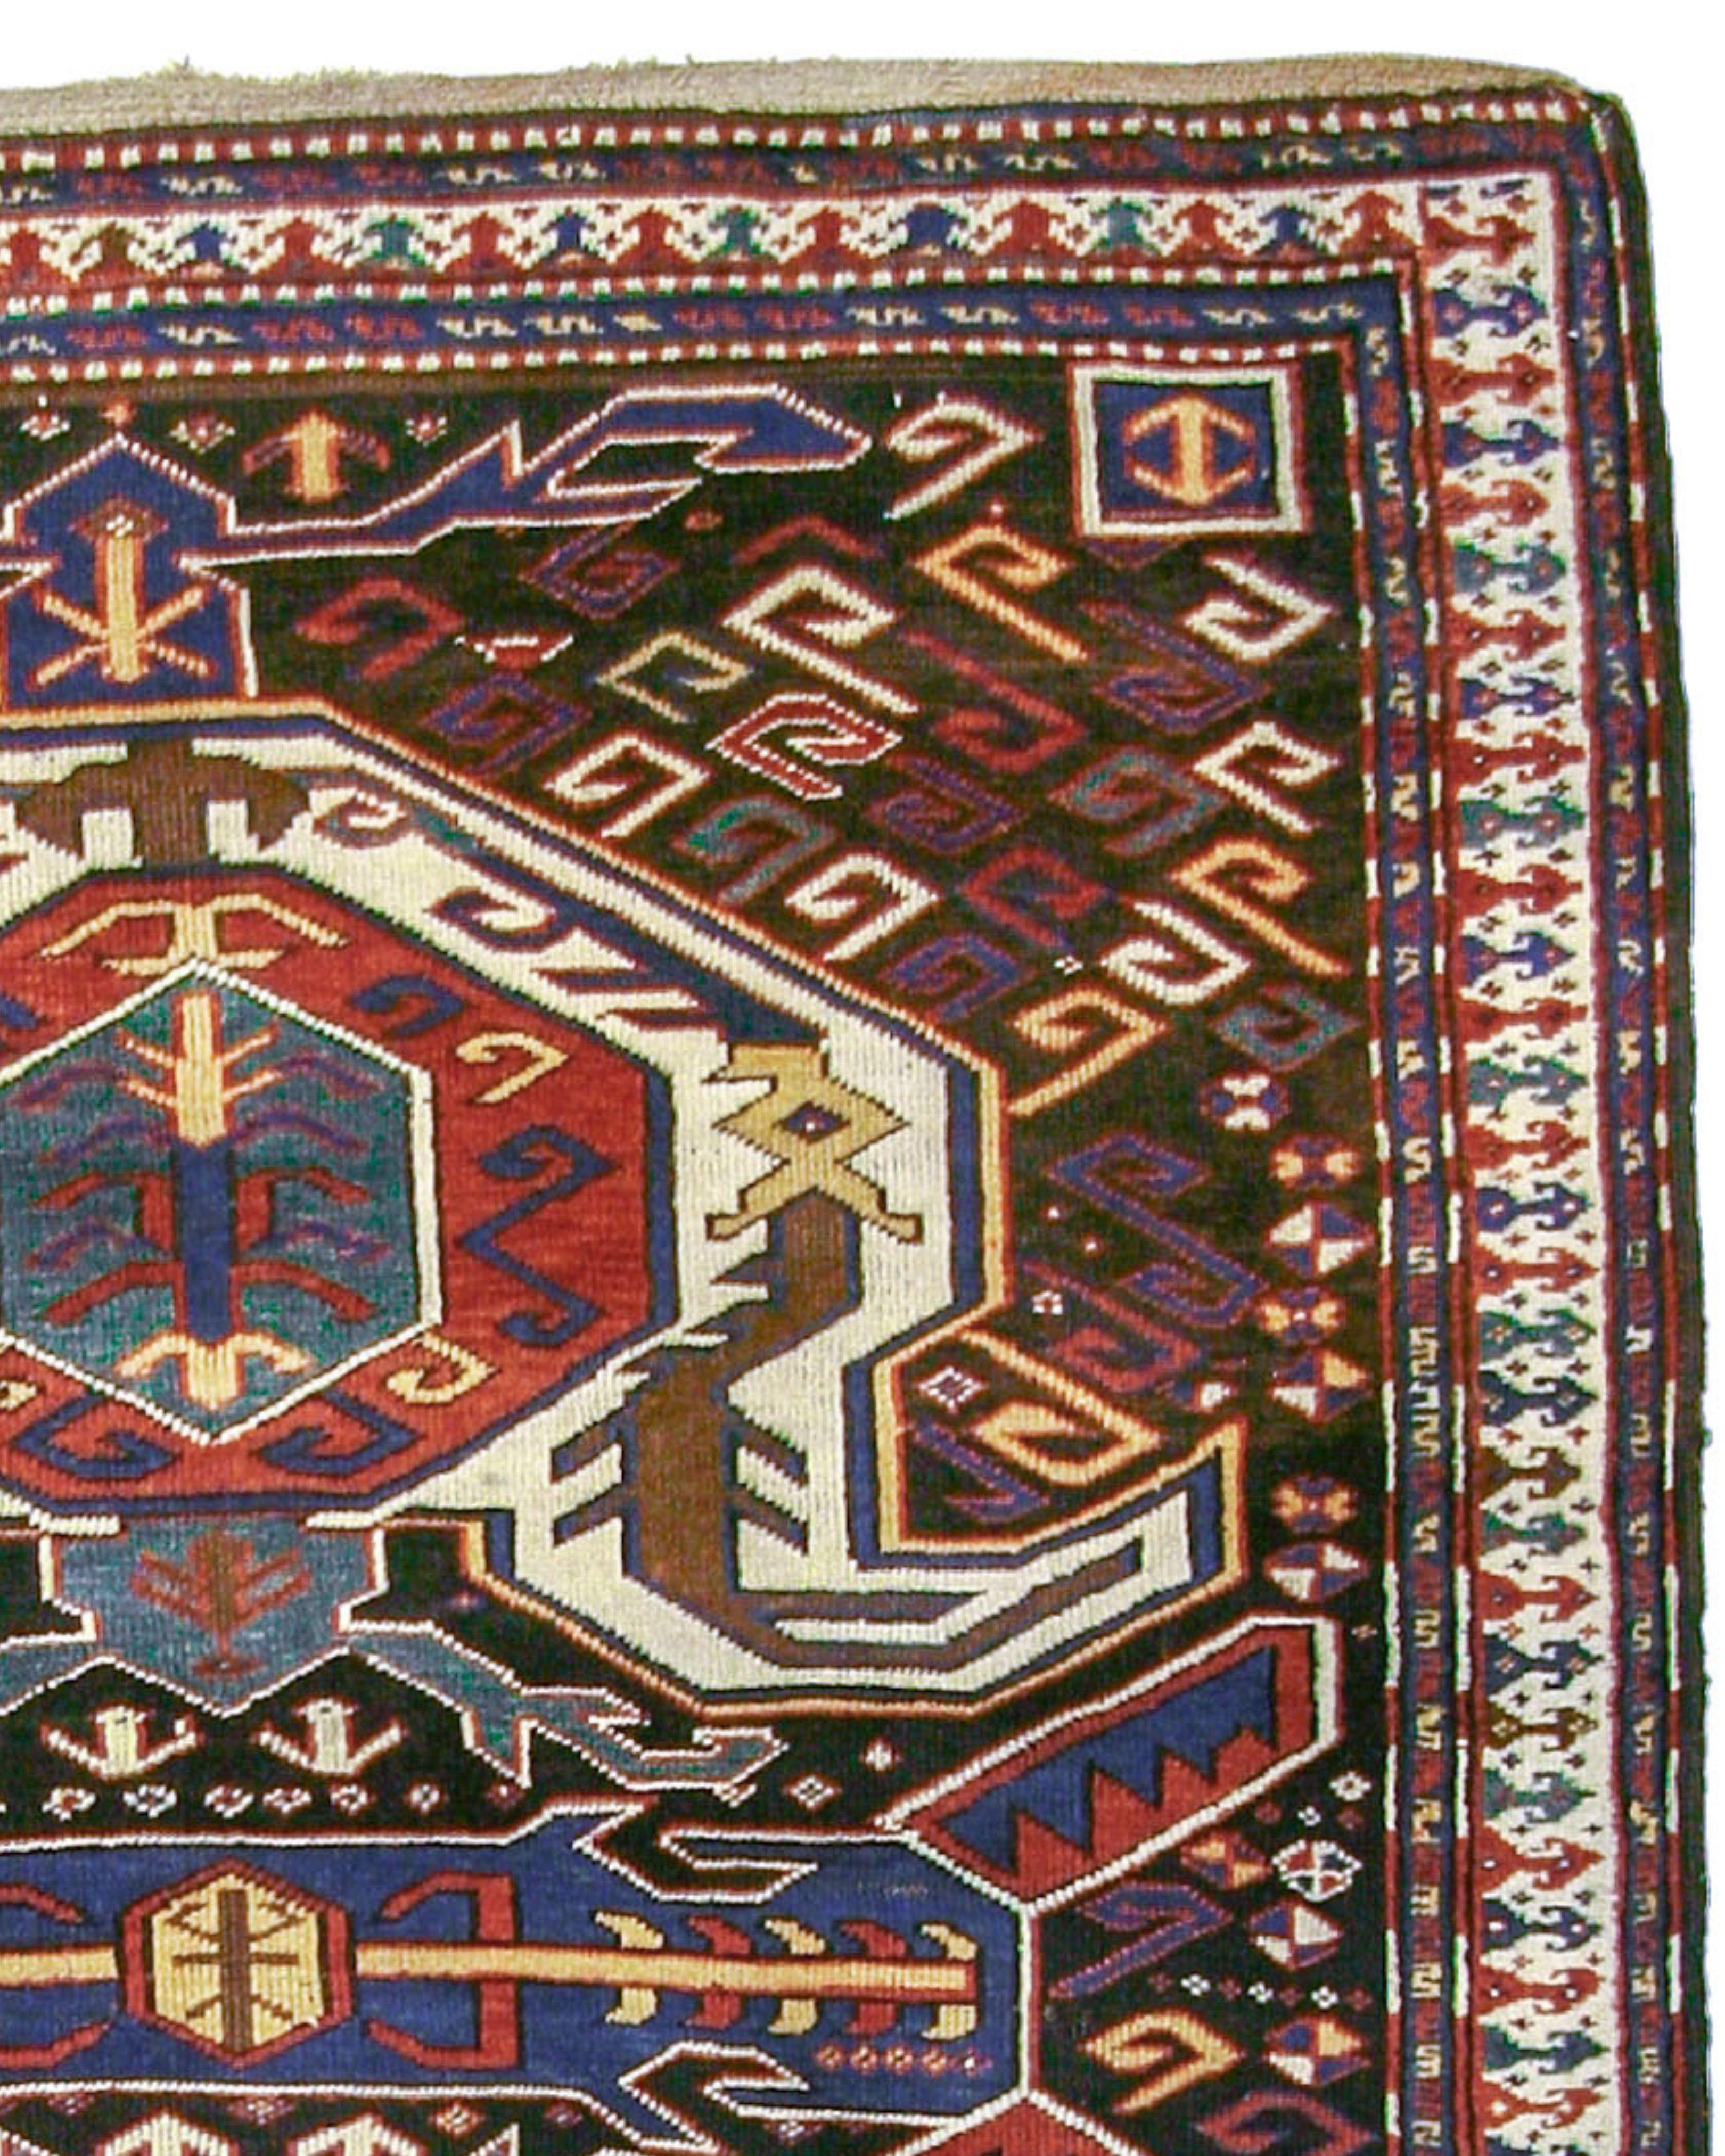 Antique Caucasian Lenkoran Rug, 19th Century

Great Caucasian rugs are renowned for their bold graphic quality and superb use of color. This Lenkoran piece exemplifies these standards. Distinctive white palmettes of the Lenkoran type here float